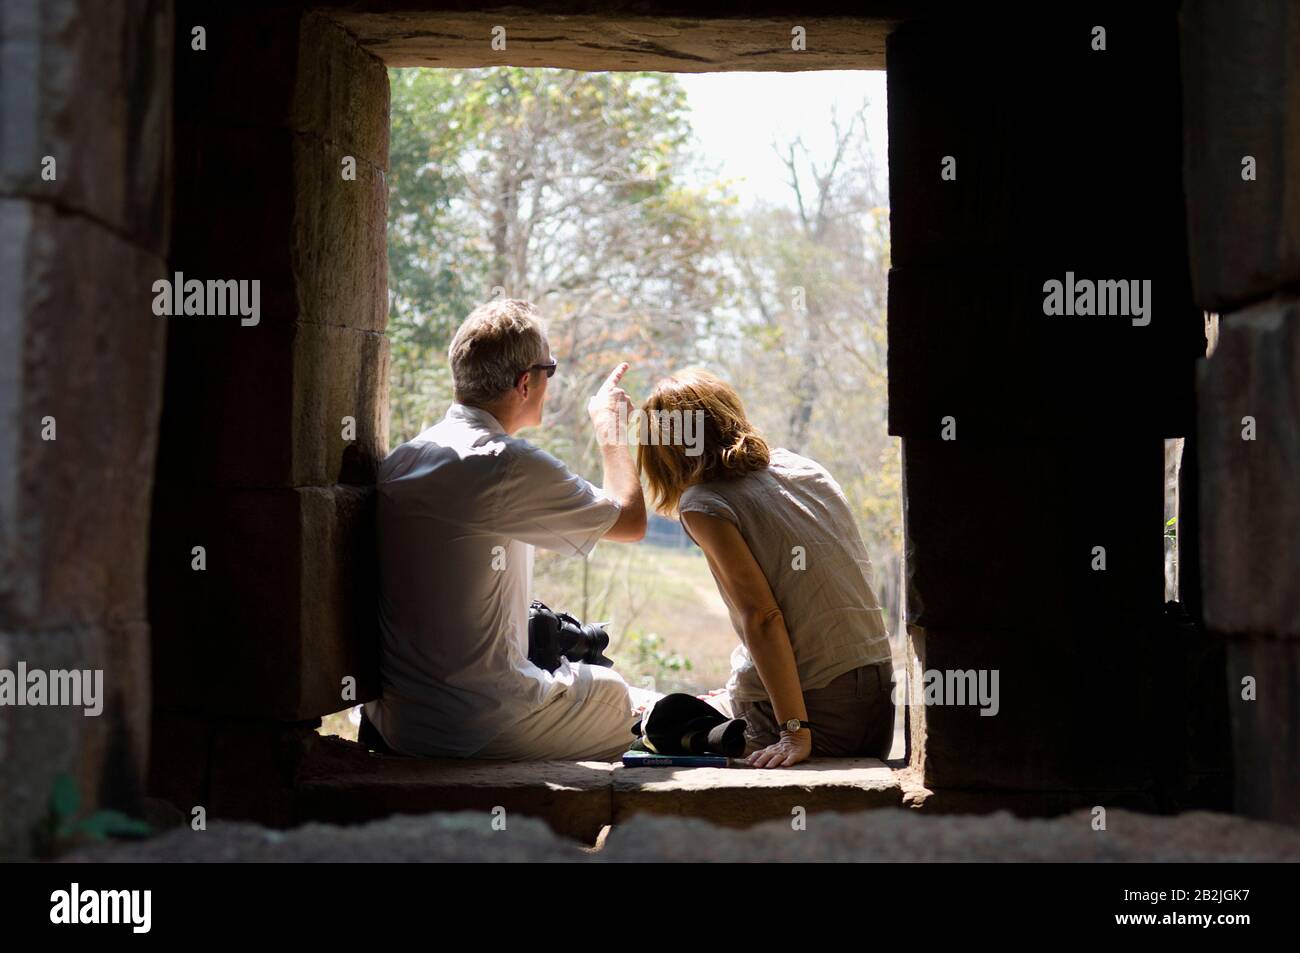 Couple Sitting in Window of Stone Building Stock Photo